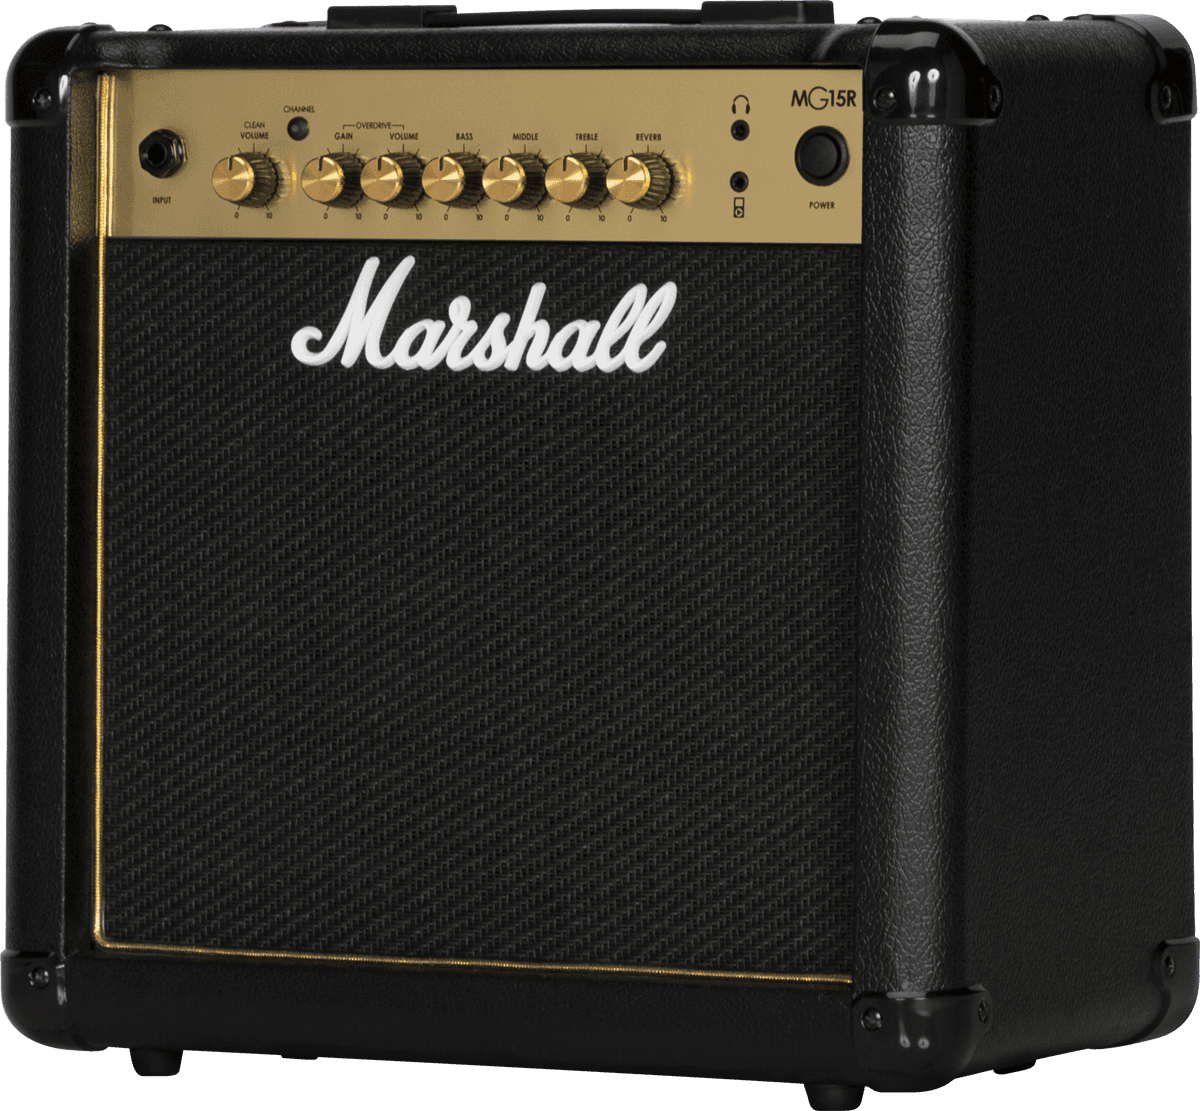 Marshall Mg15gr Mg Gold 15w 1x8 - Ampli Guitare Électrique Combo - Variation 1